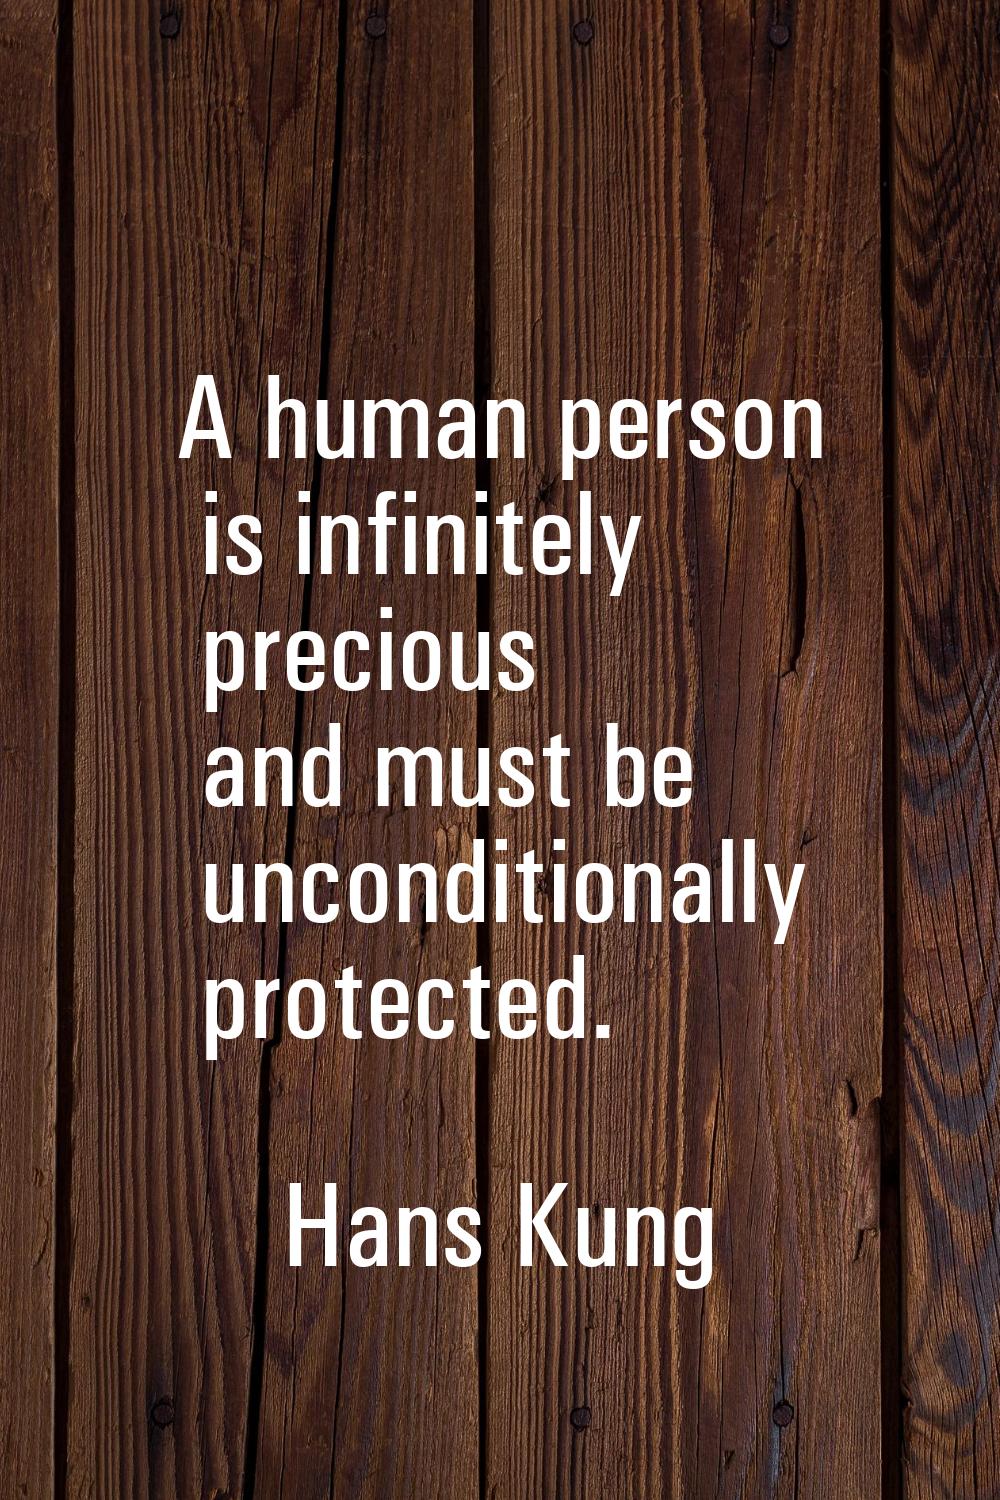 A human person is infinitely precious and must be unconditionally protected.